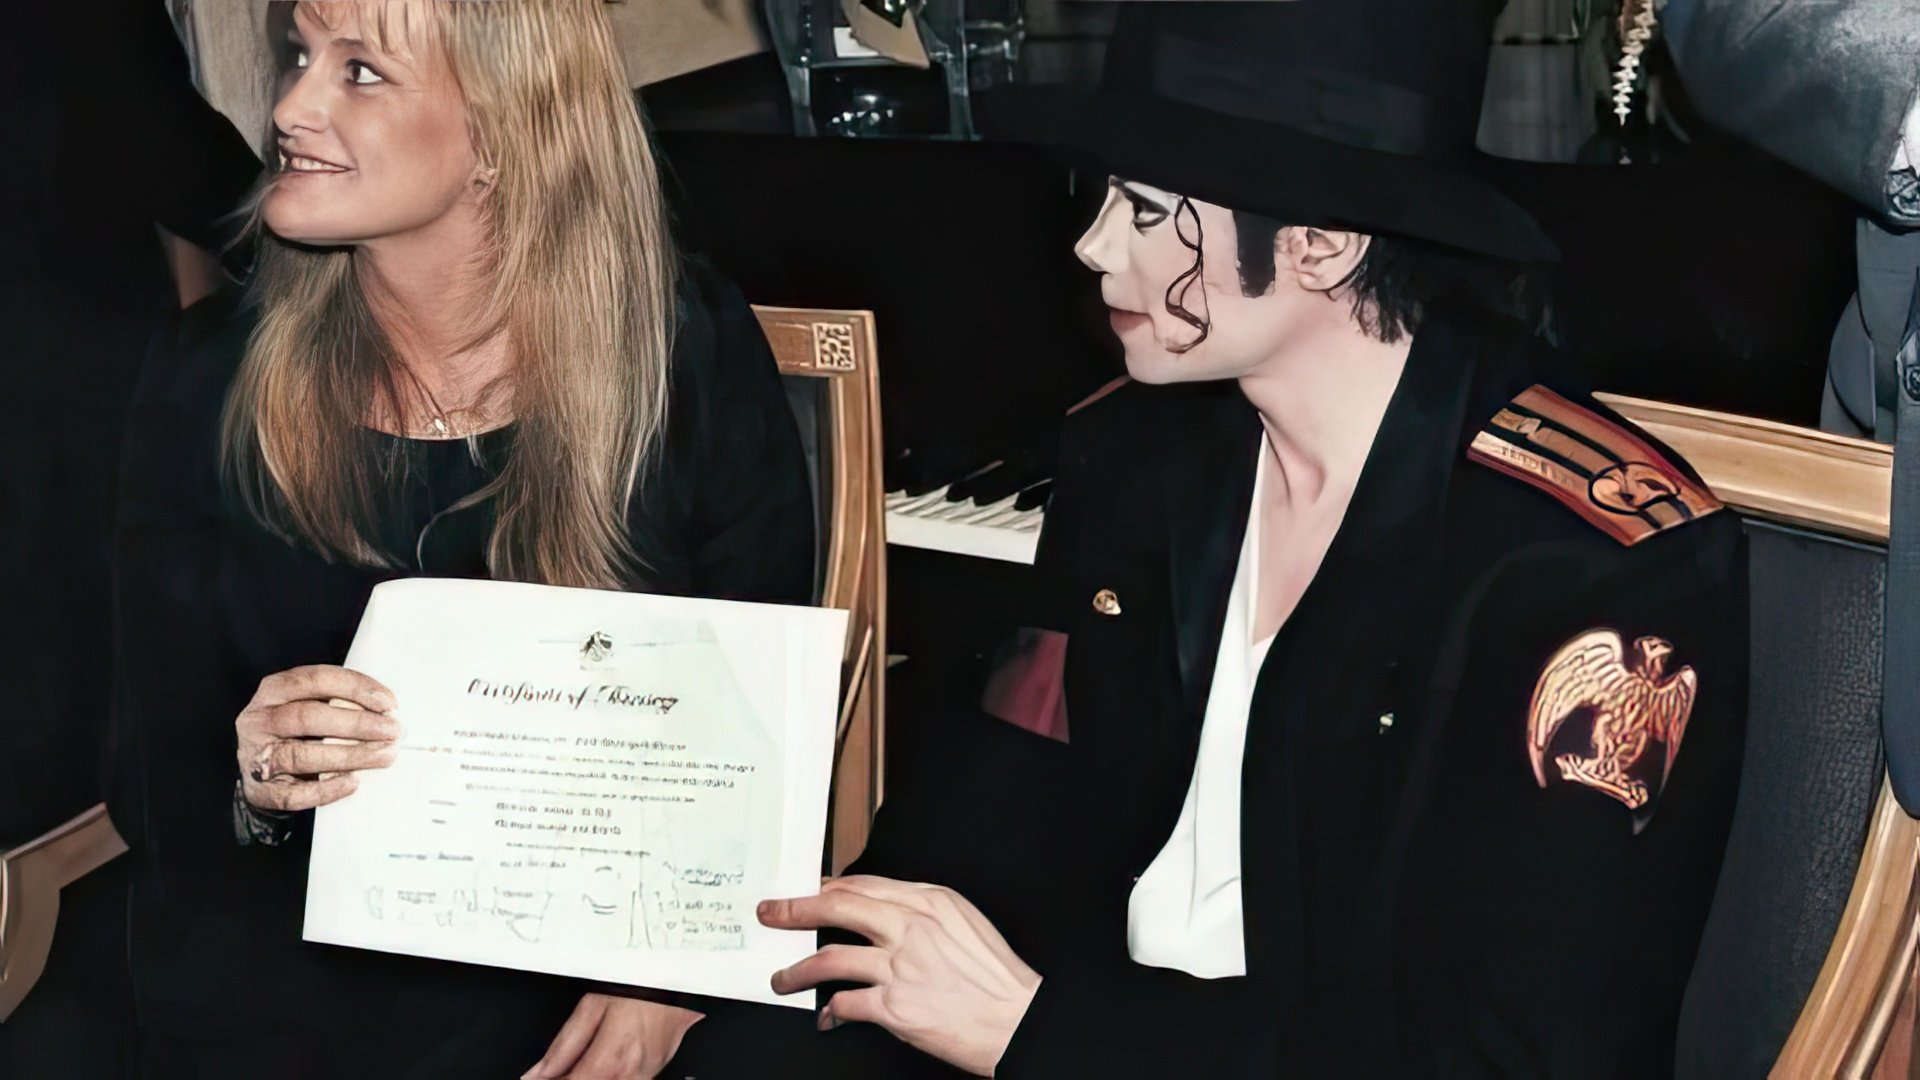 Michael Jackson and Debbie Rowe got married out of convenience